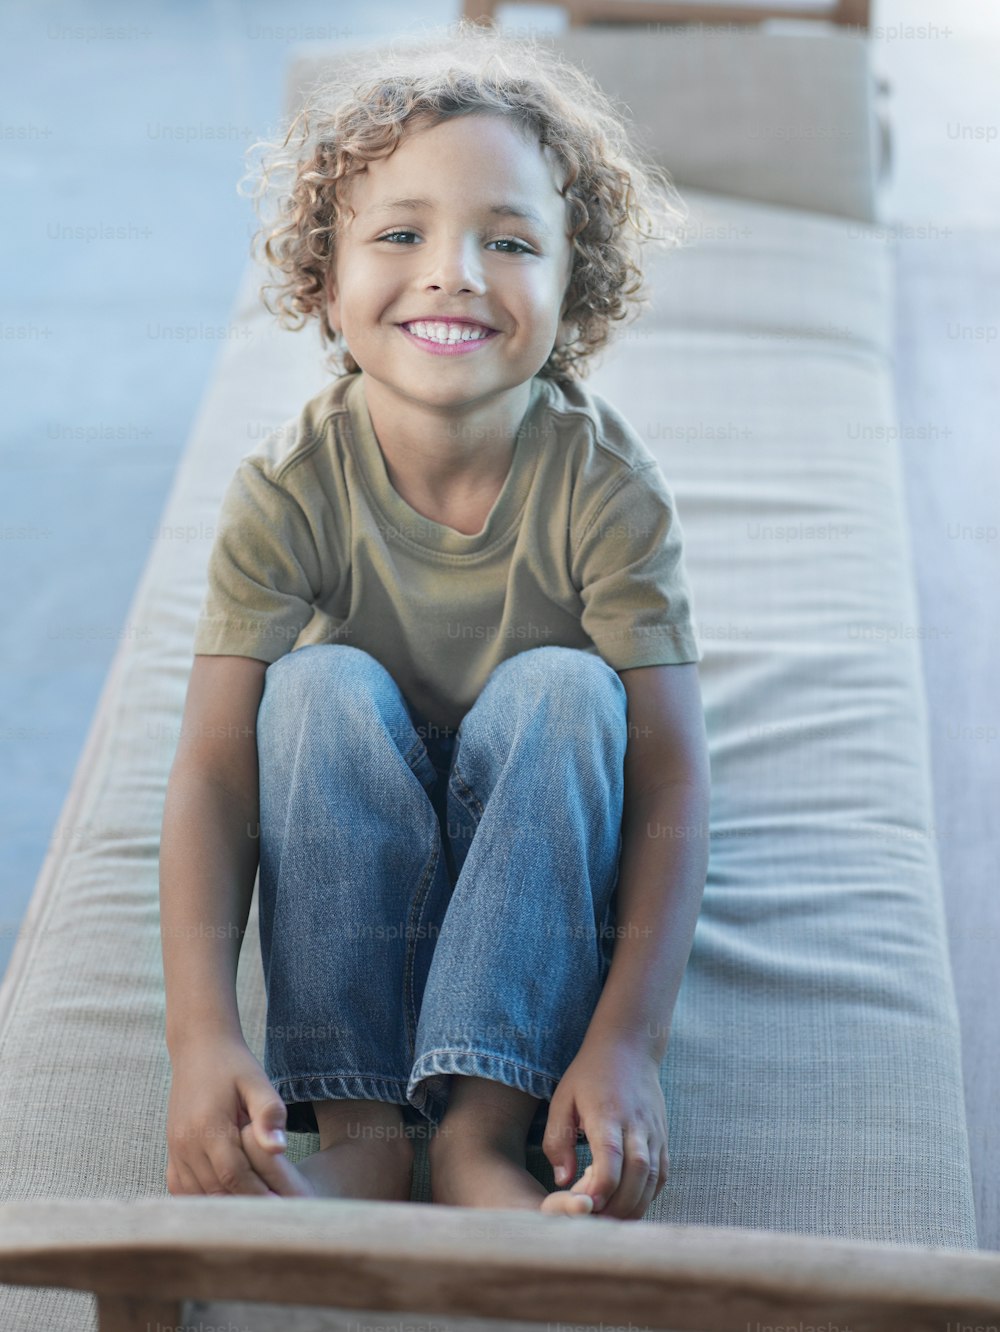 a little boy sitting on a couch smiling